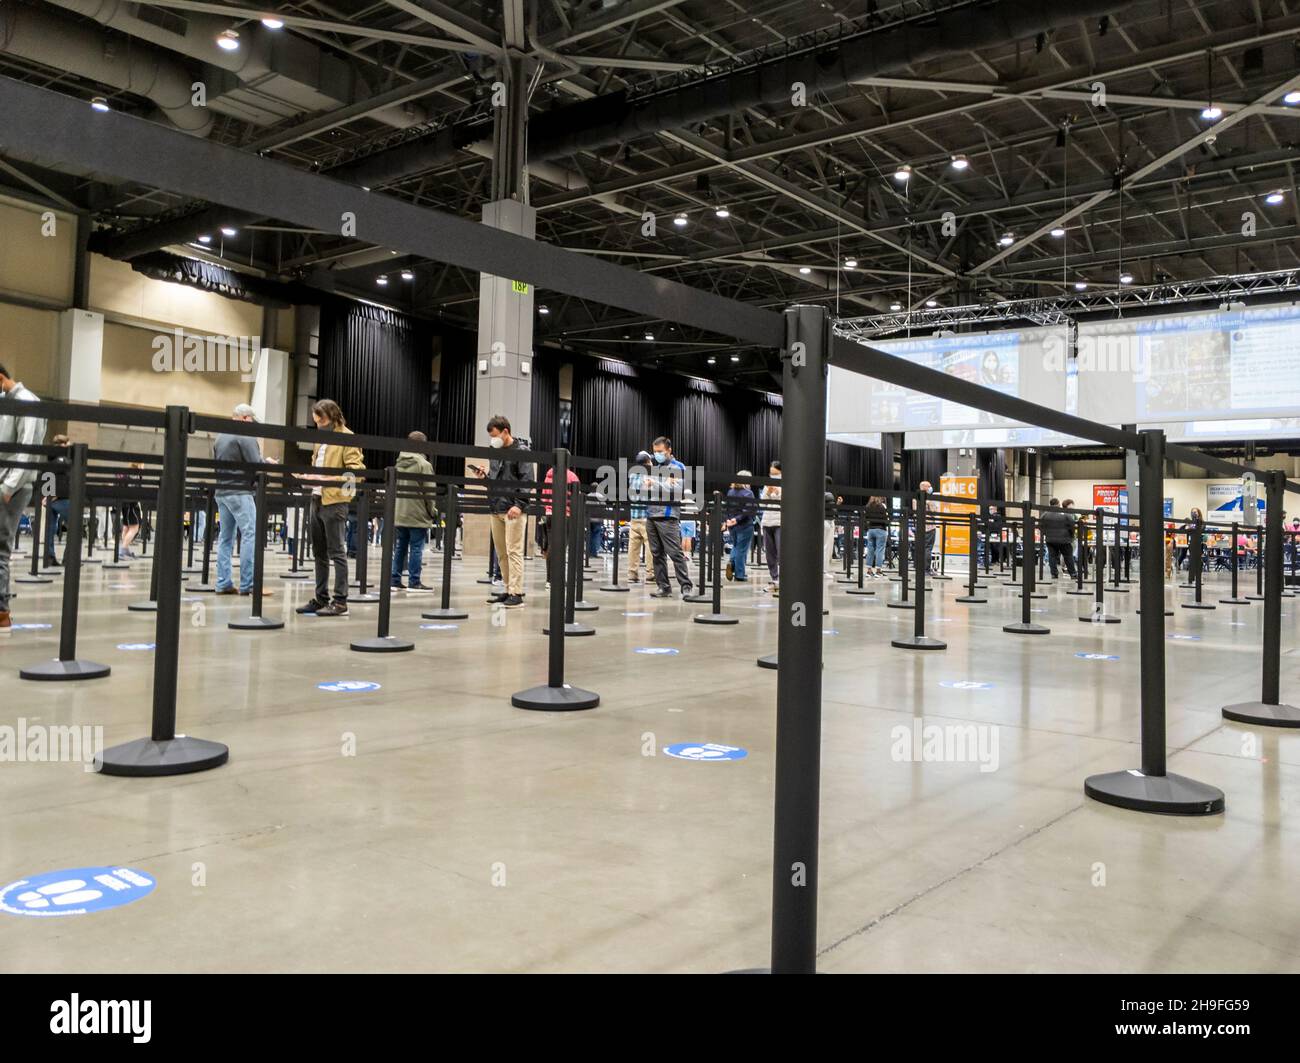 Seattle, WA USA - circa May 2021: View of separated lines for people to queue up for health screenings before getting the covid 19 vaccine. Stock Photo